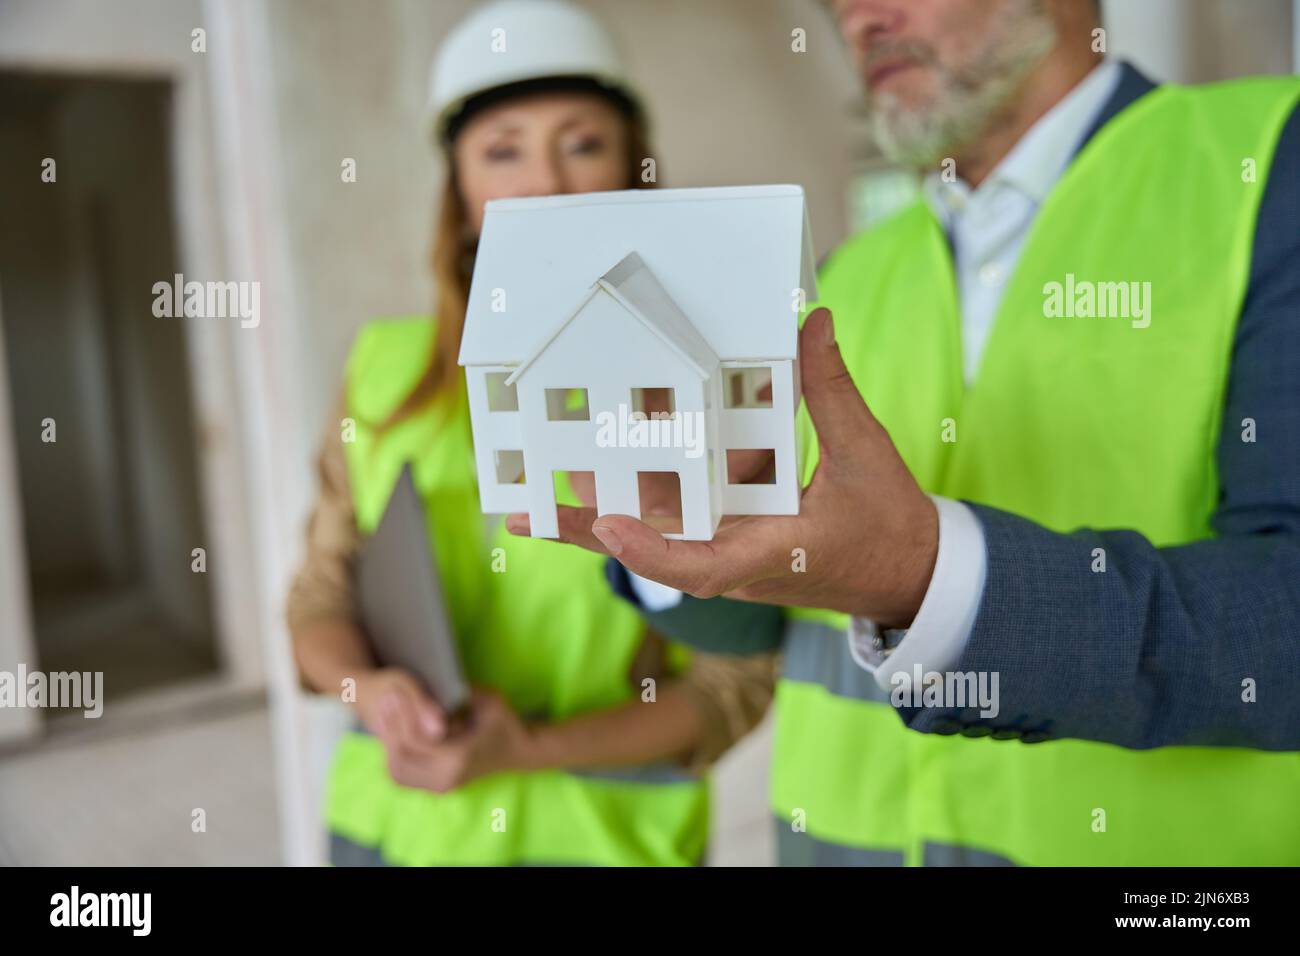 Foreman shows real estate manager a miniature house. Construction progress Stock Photo